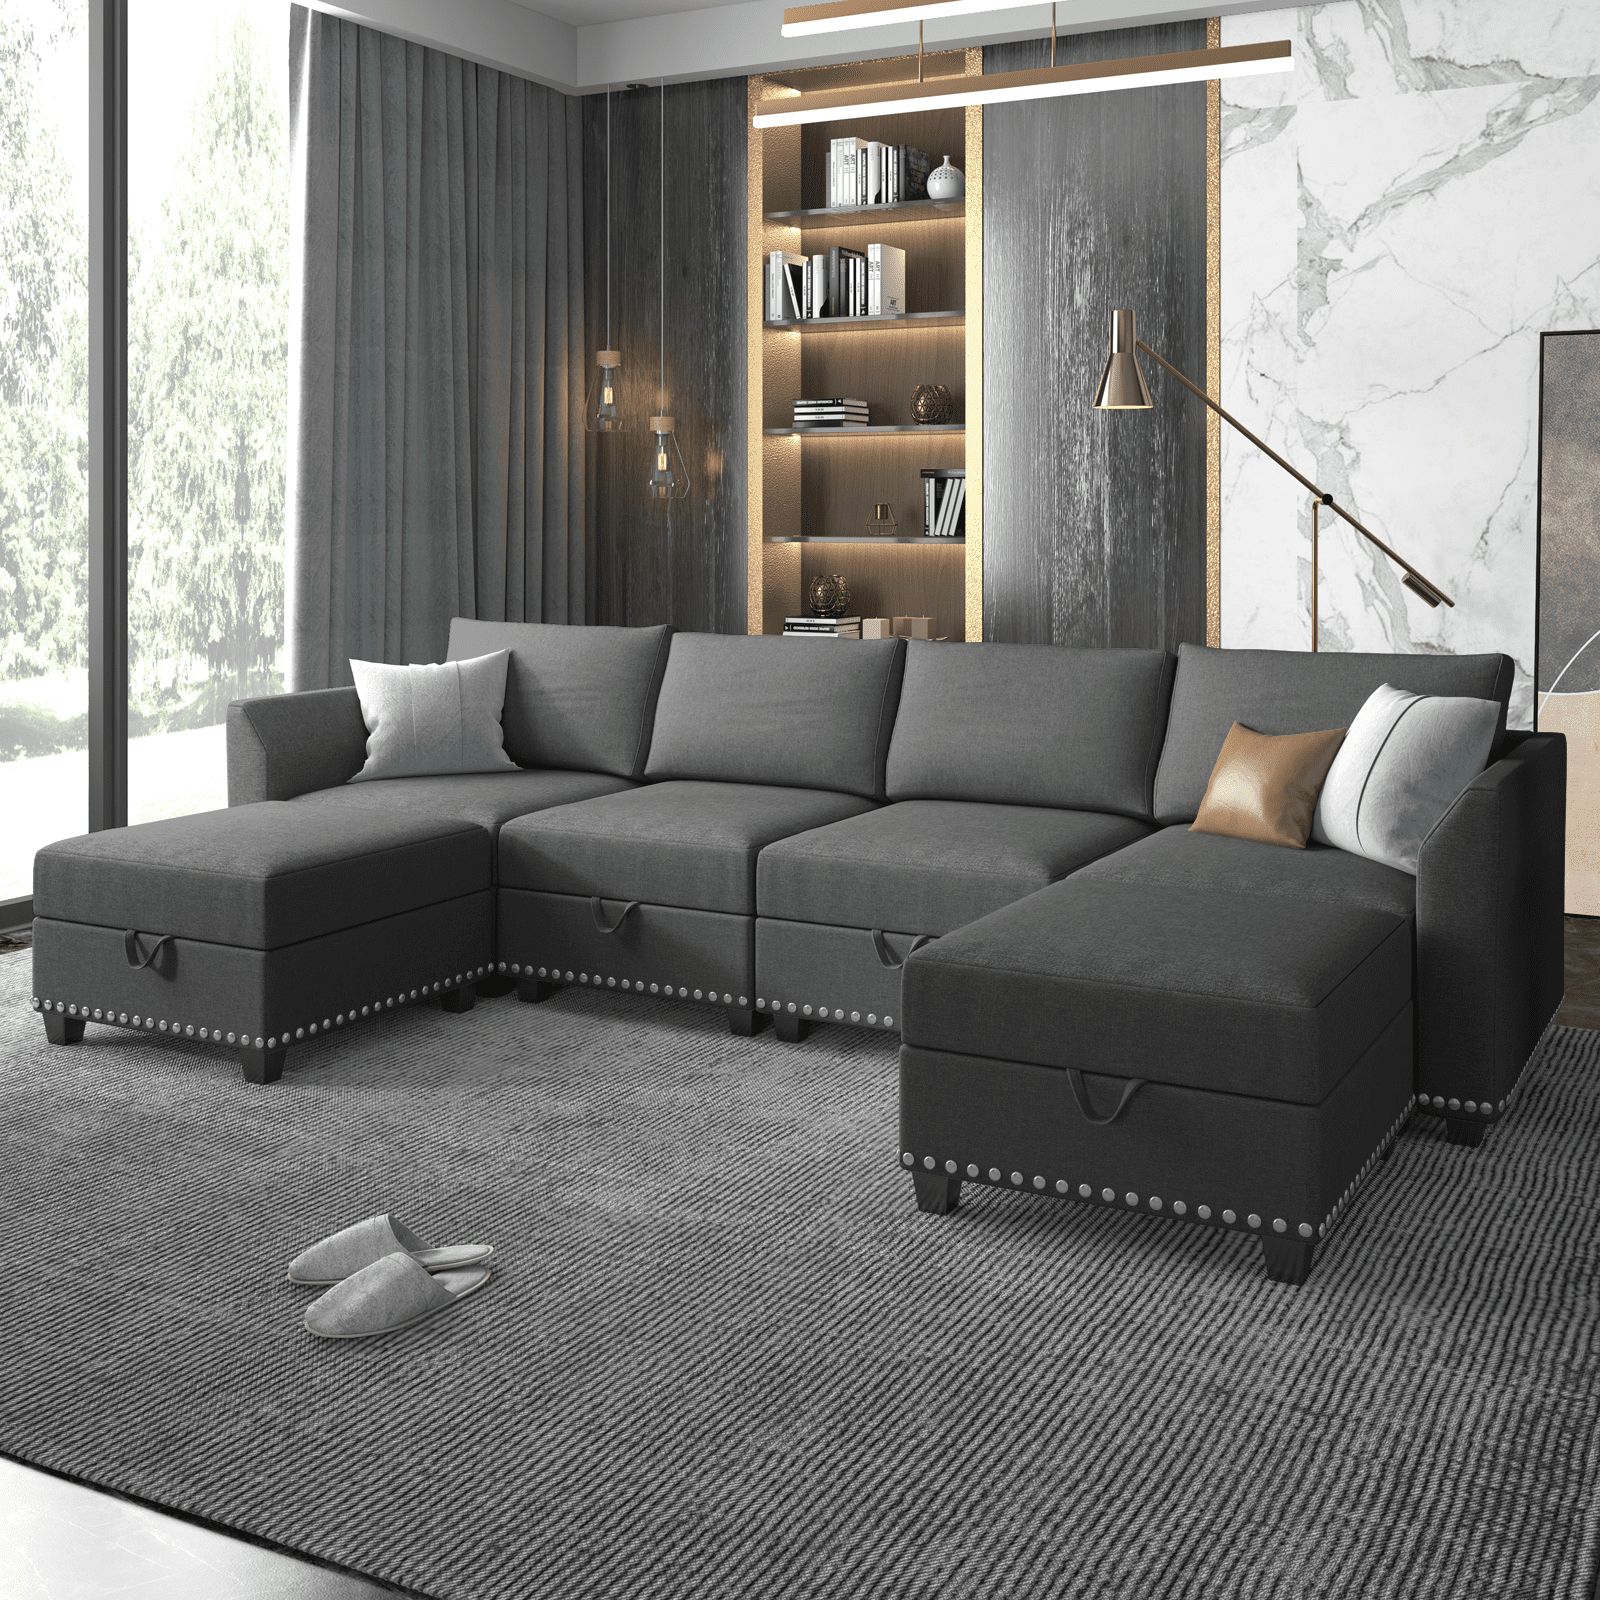 Mjkone U Shaped Sectional Sofa With Storage, 6 Seater Modular Sectional Sofa  With Nailhead Trim, Oversized Sleeper Sofa Couch Bed, Convertible Couches  For Living Room,free Combination (dark Grey） – Walmart Within 6 Seater Modular Sectional Sofas (Gallery 5 of 20)